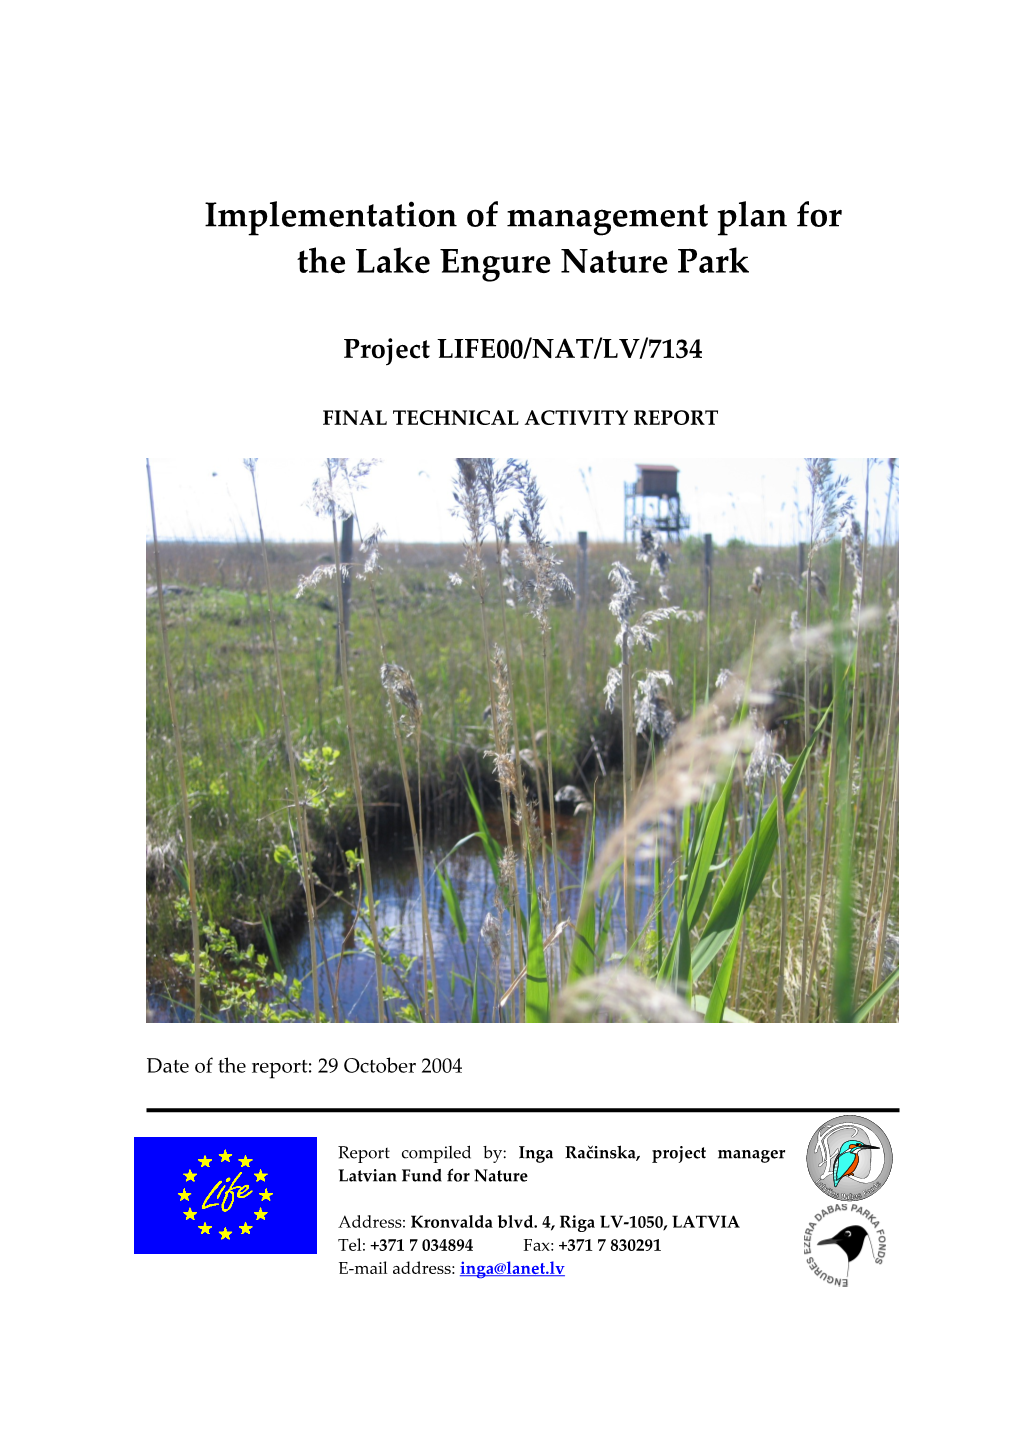 Implementation of Management Plan for the Lake Engure Nature Park